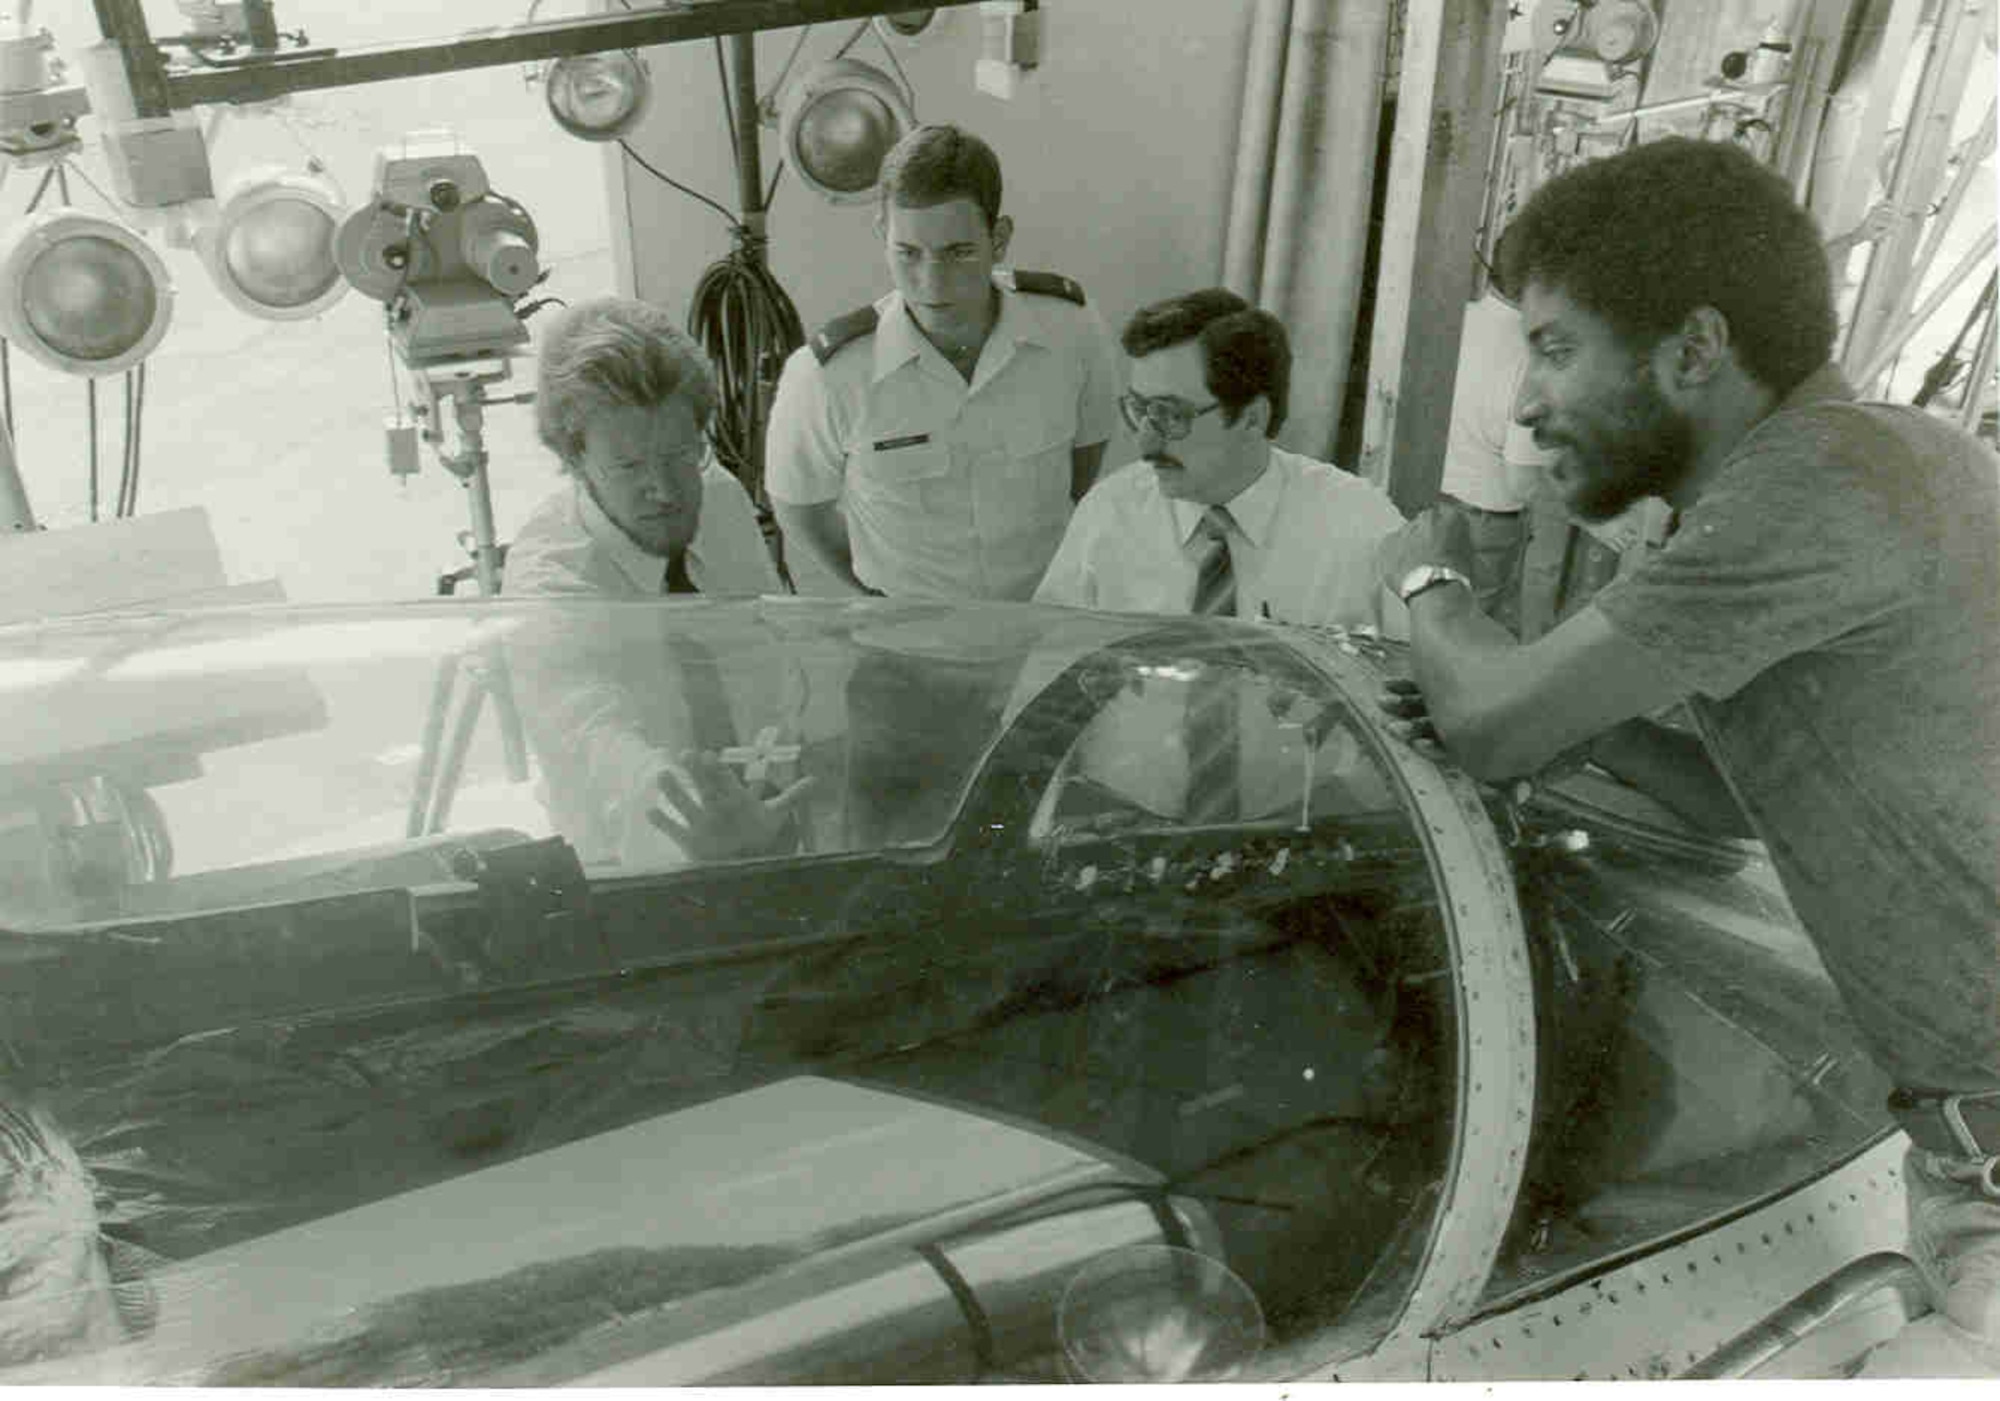 An aircraft canopy is readied for simulated bird strike testing by, from left, Jon Storslee, 2nd Lt. Mark Retzloff, then-Air Force test director Tom Best and Butch Garrett at the Bird Impact Range at Arnold Air Force Base, Tennessee, in 1982. The range, commonly referred to as the “Chicken Gun,” was used to simulate in-flight bird strikes to aircraft canopies and other materials by launching chicken carcasses at test articles. The first shot from the Chicken Gun was fired 50 years ago. (U.S. Air Force photo)